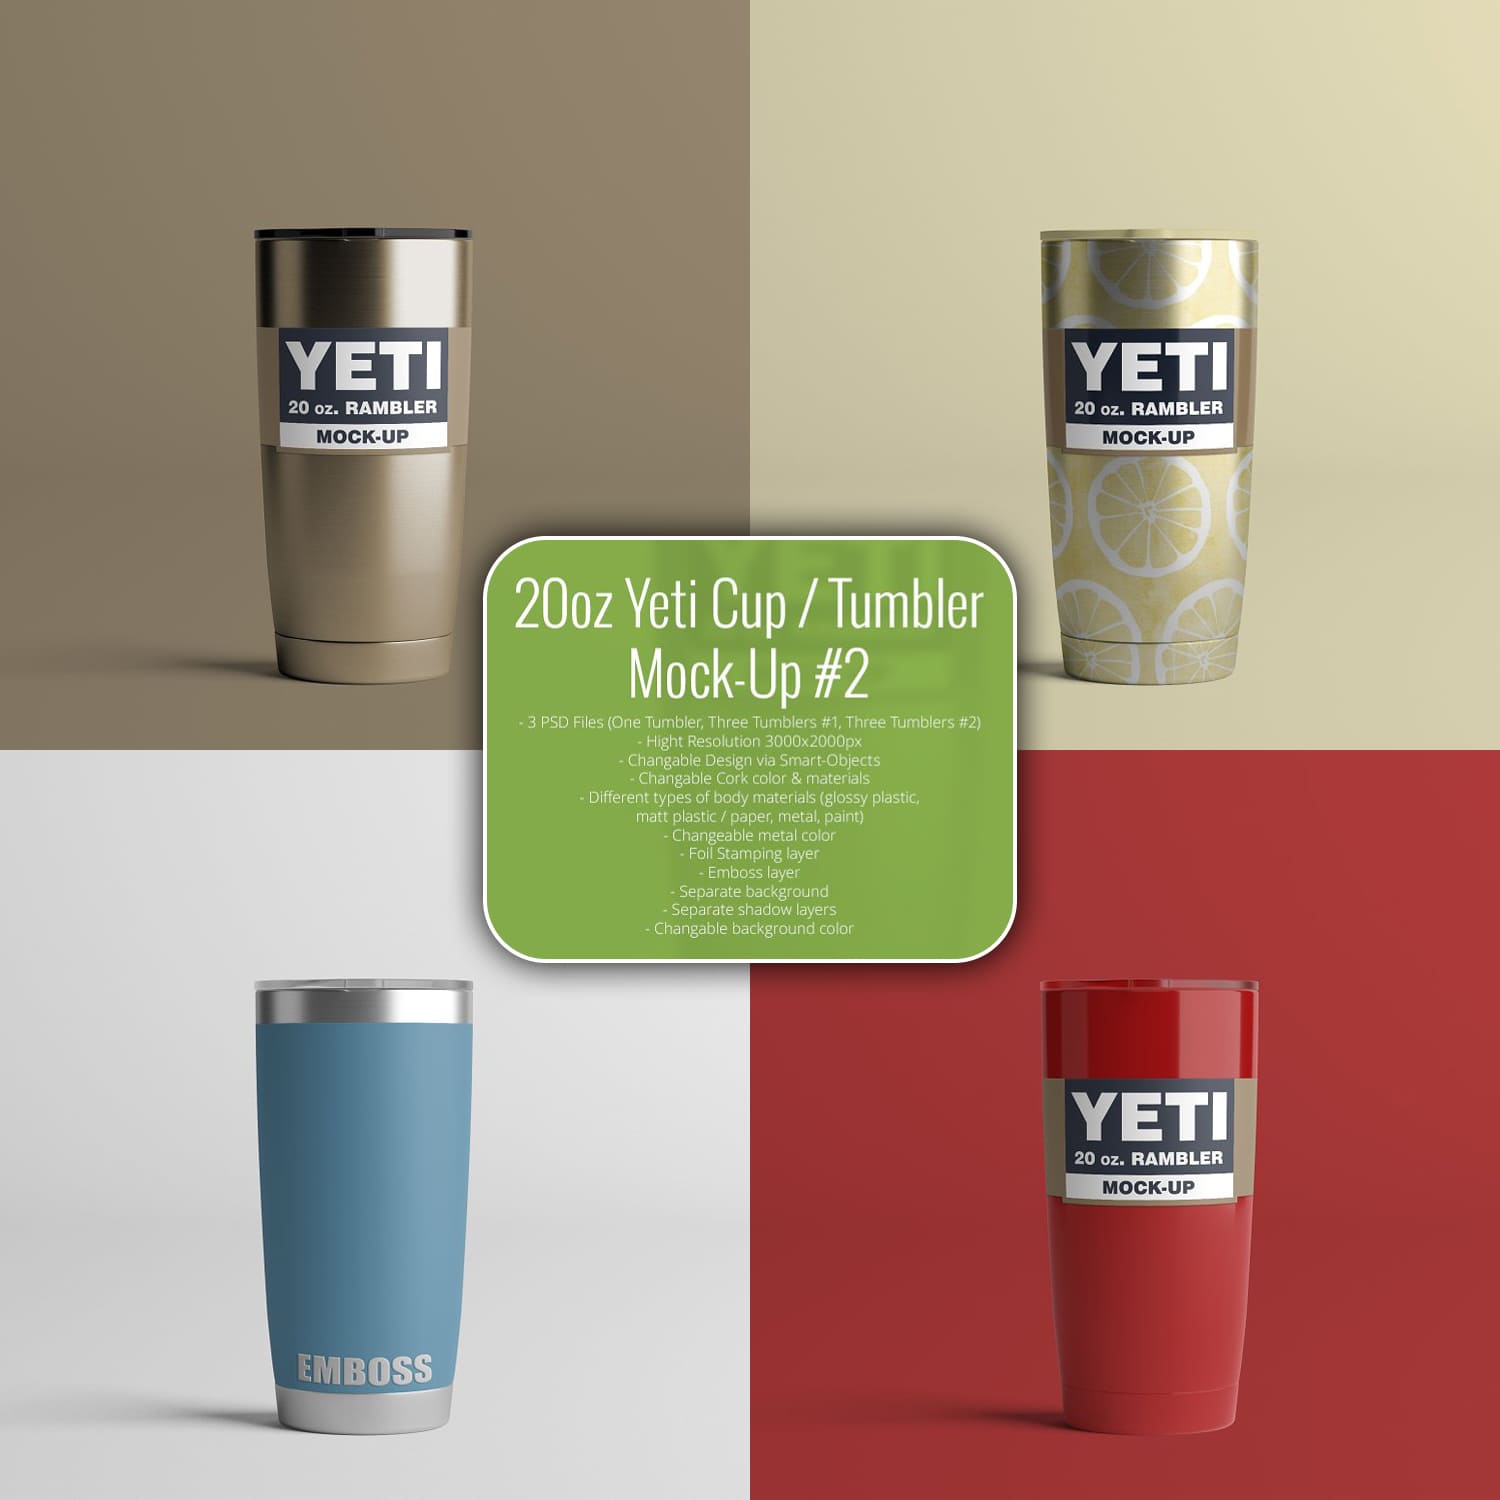 20oz. Yeti Cup / Tumbler Mock-Up #2 cover.